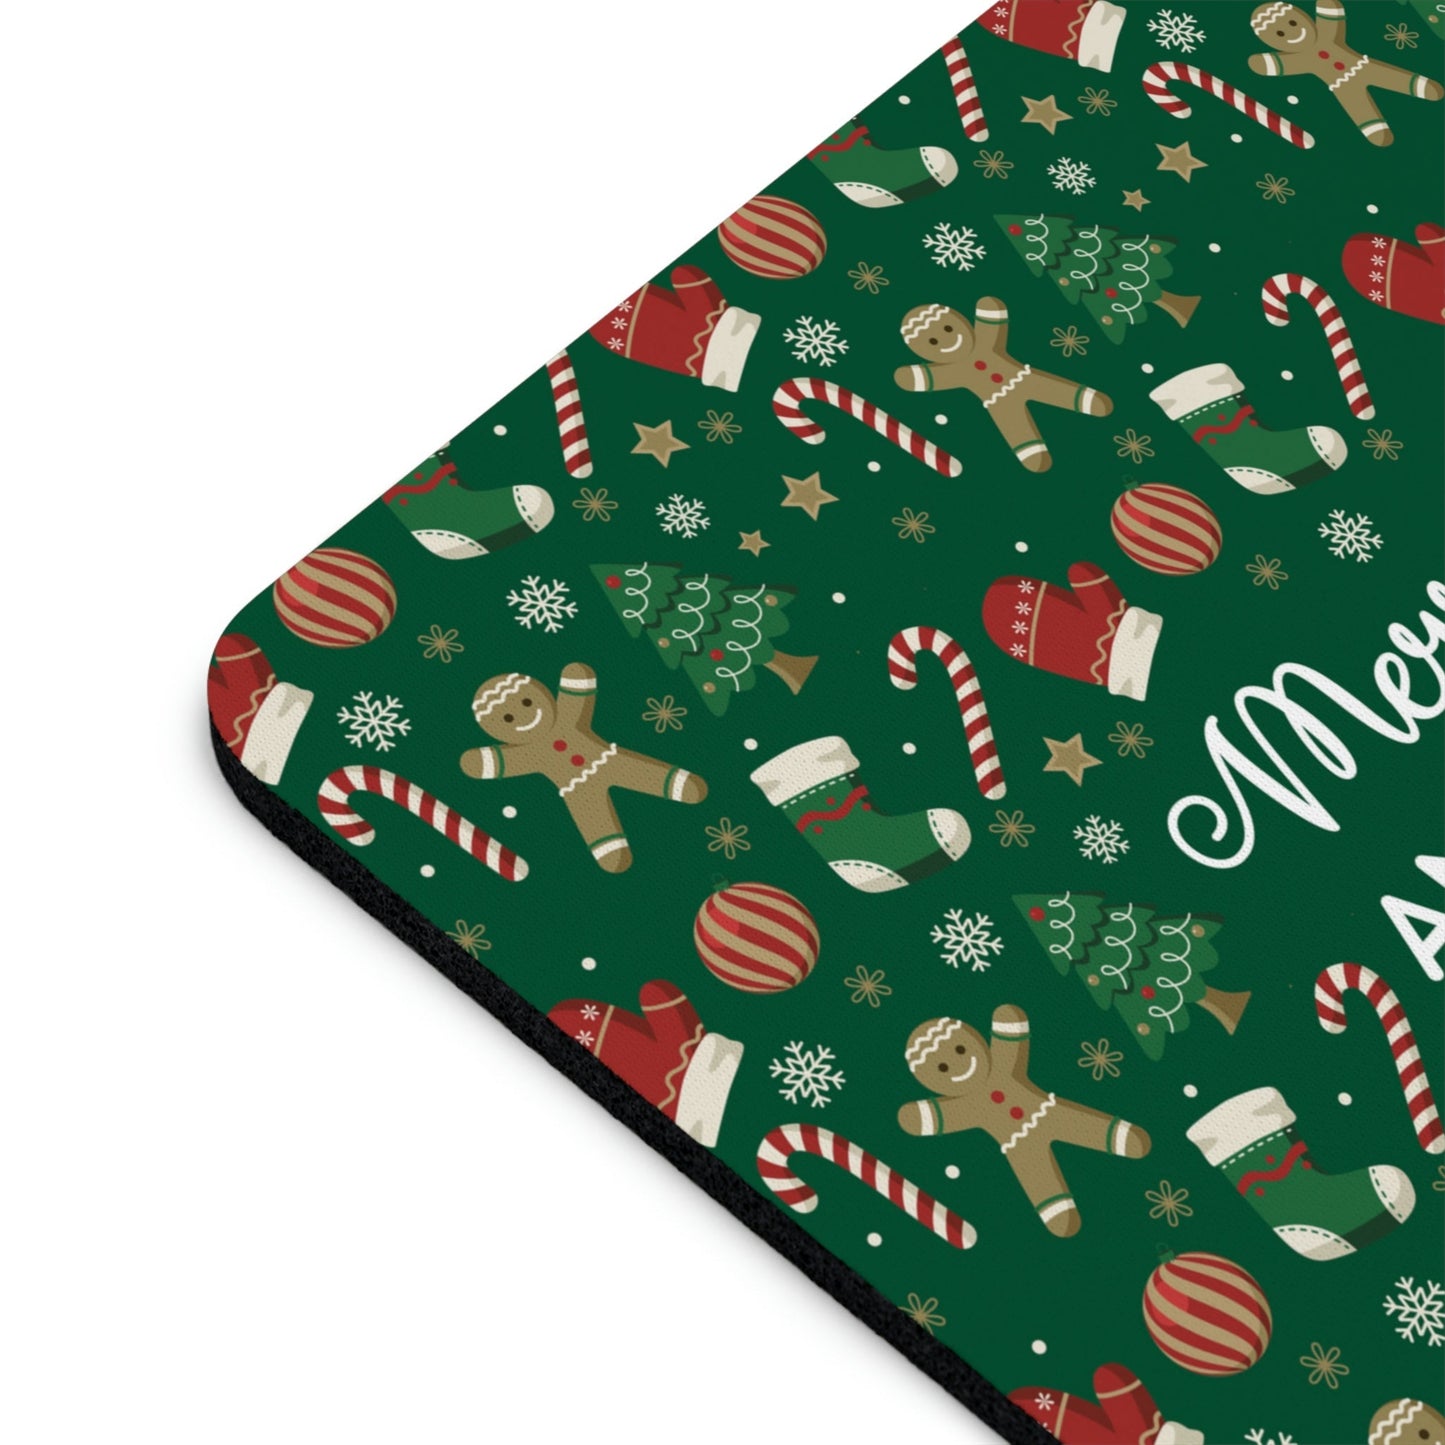 Merry Christmas and Don't Touch my Cookies Quotes Ergonomic Non-slip Creative Design Mouse Pad Ichaku [Perfect Gifts Selection]